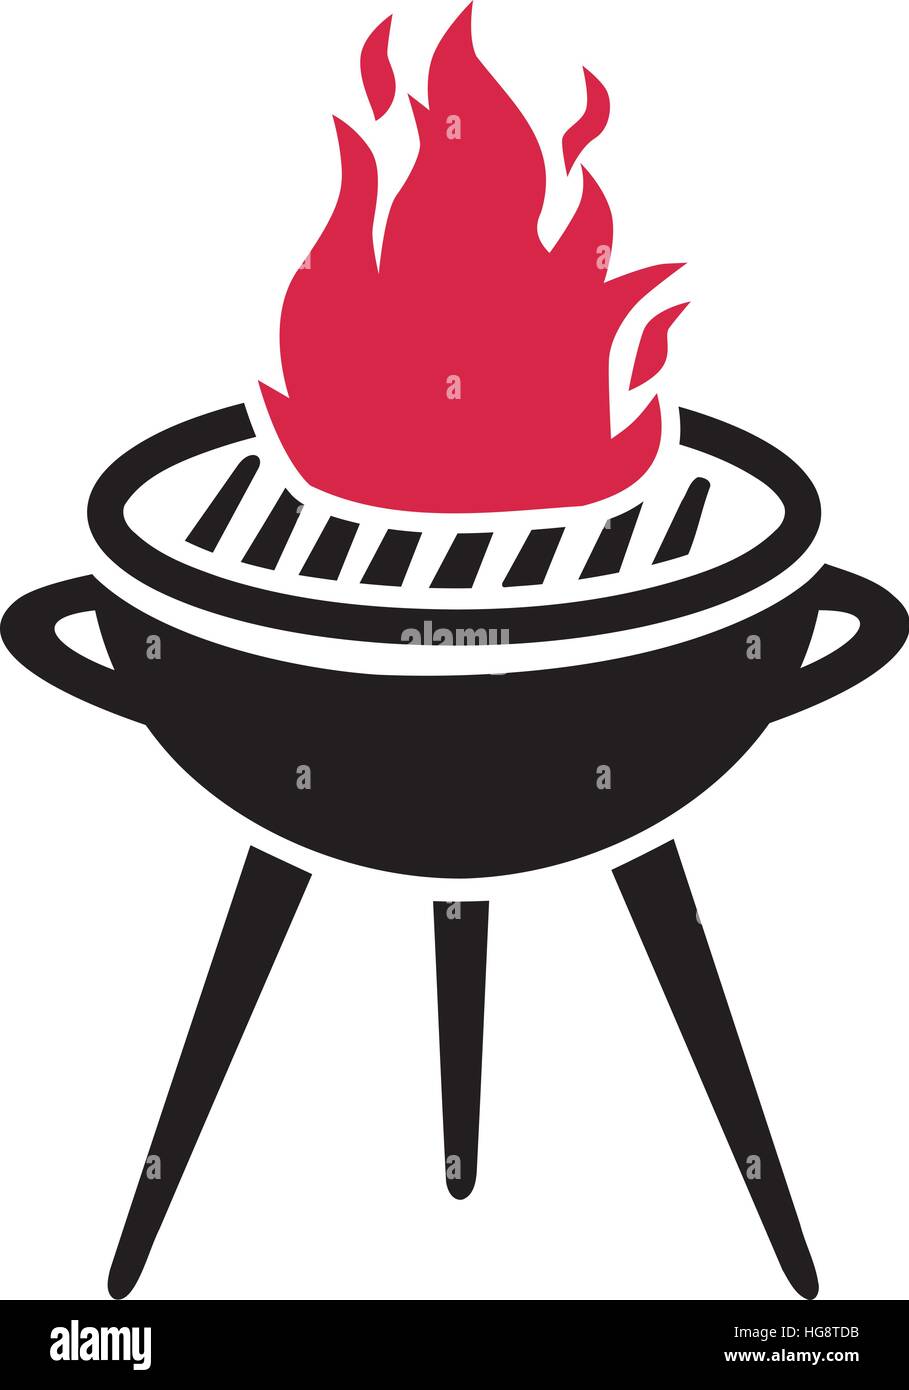 Barbecue grill with hot flame Stock Vector